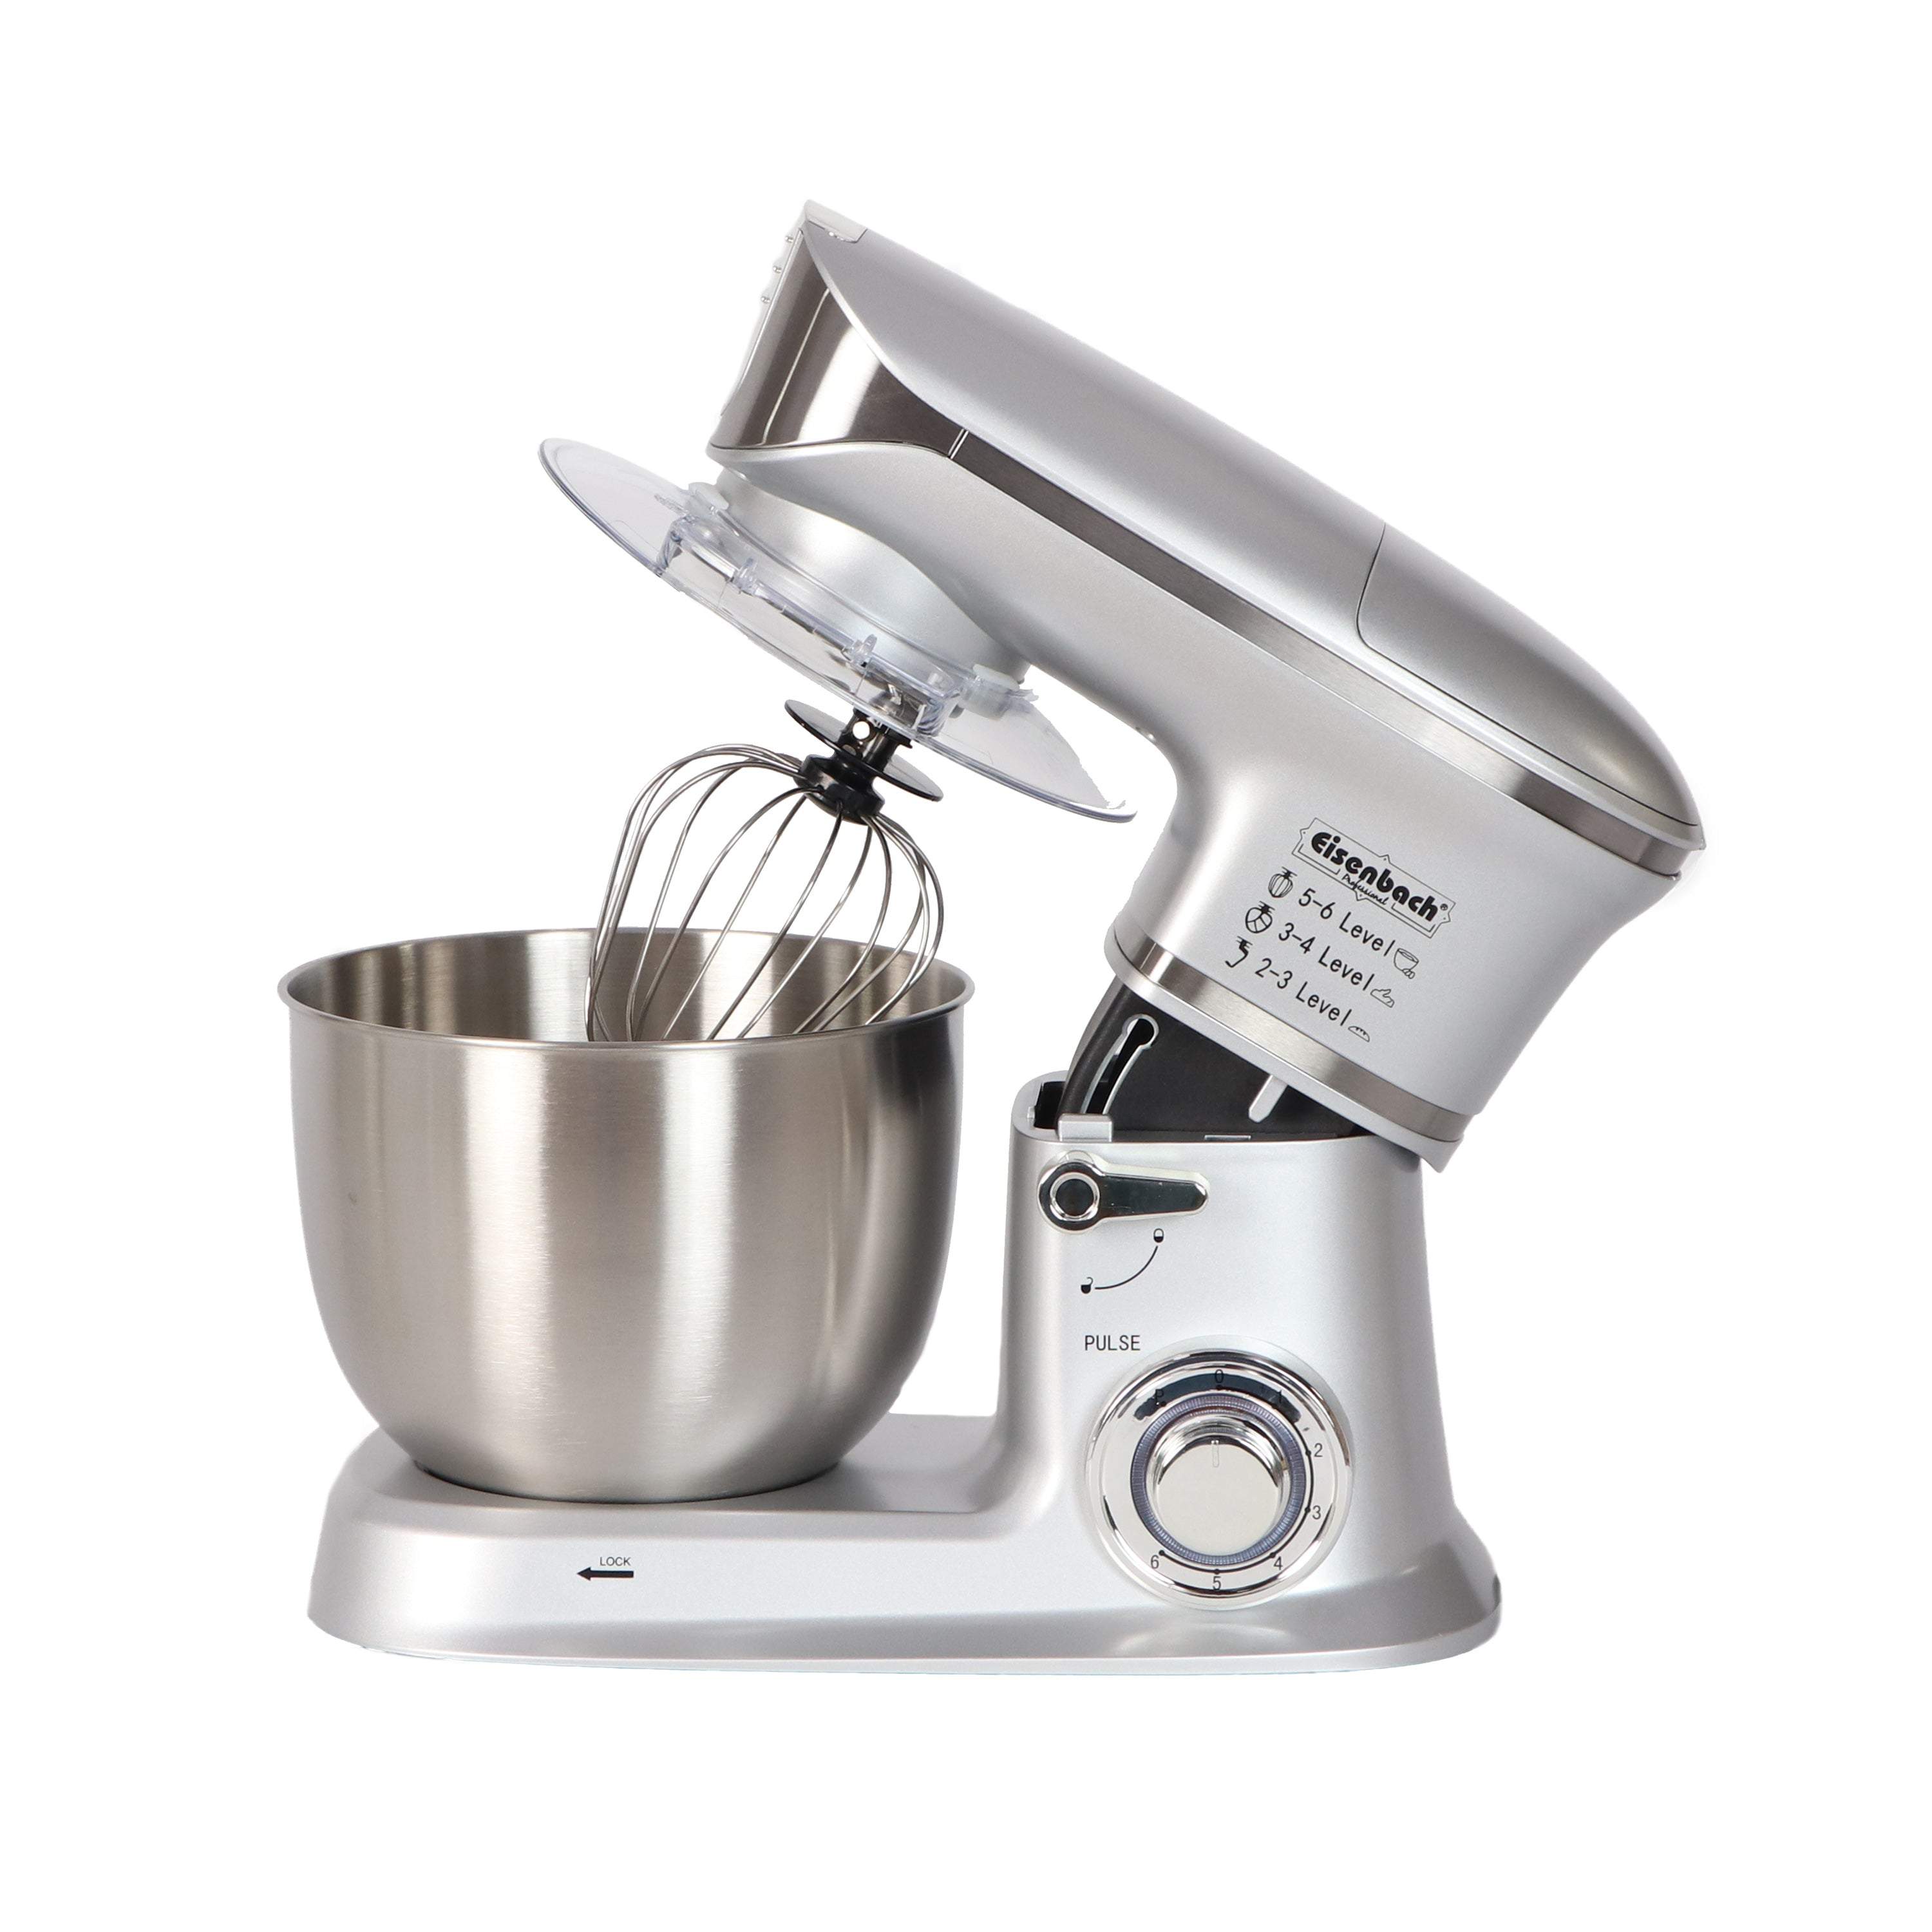 Eisenbach 3-in-1 Stand Mixer SC-263-C 2000W 6.5 L-Royal Brands Co-